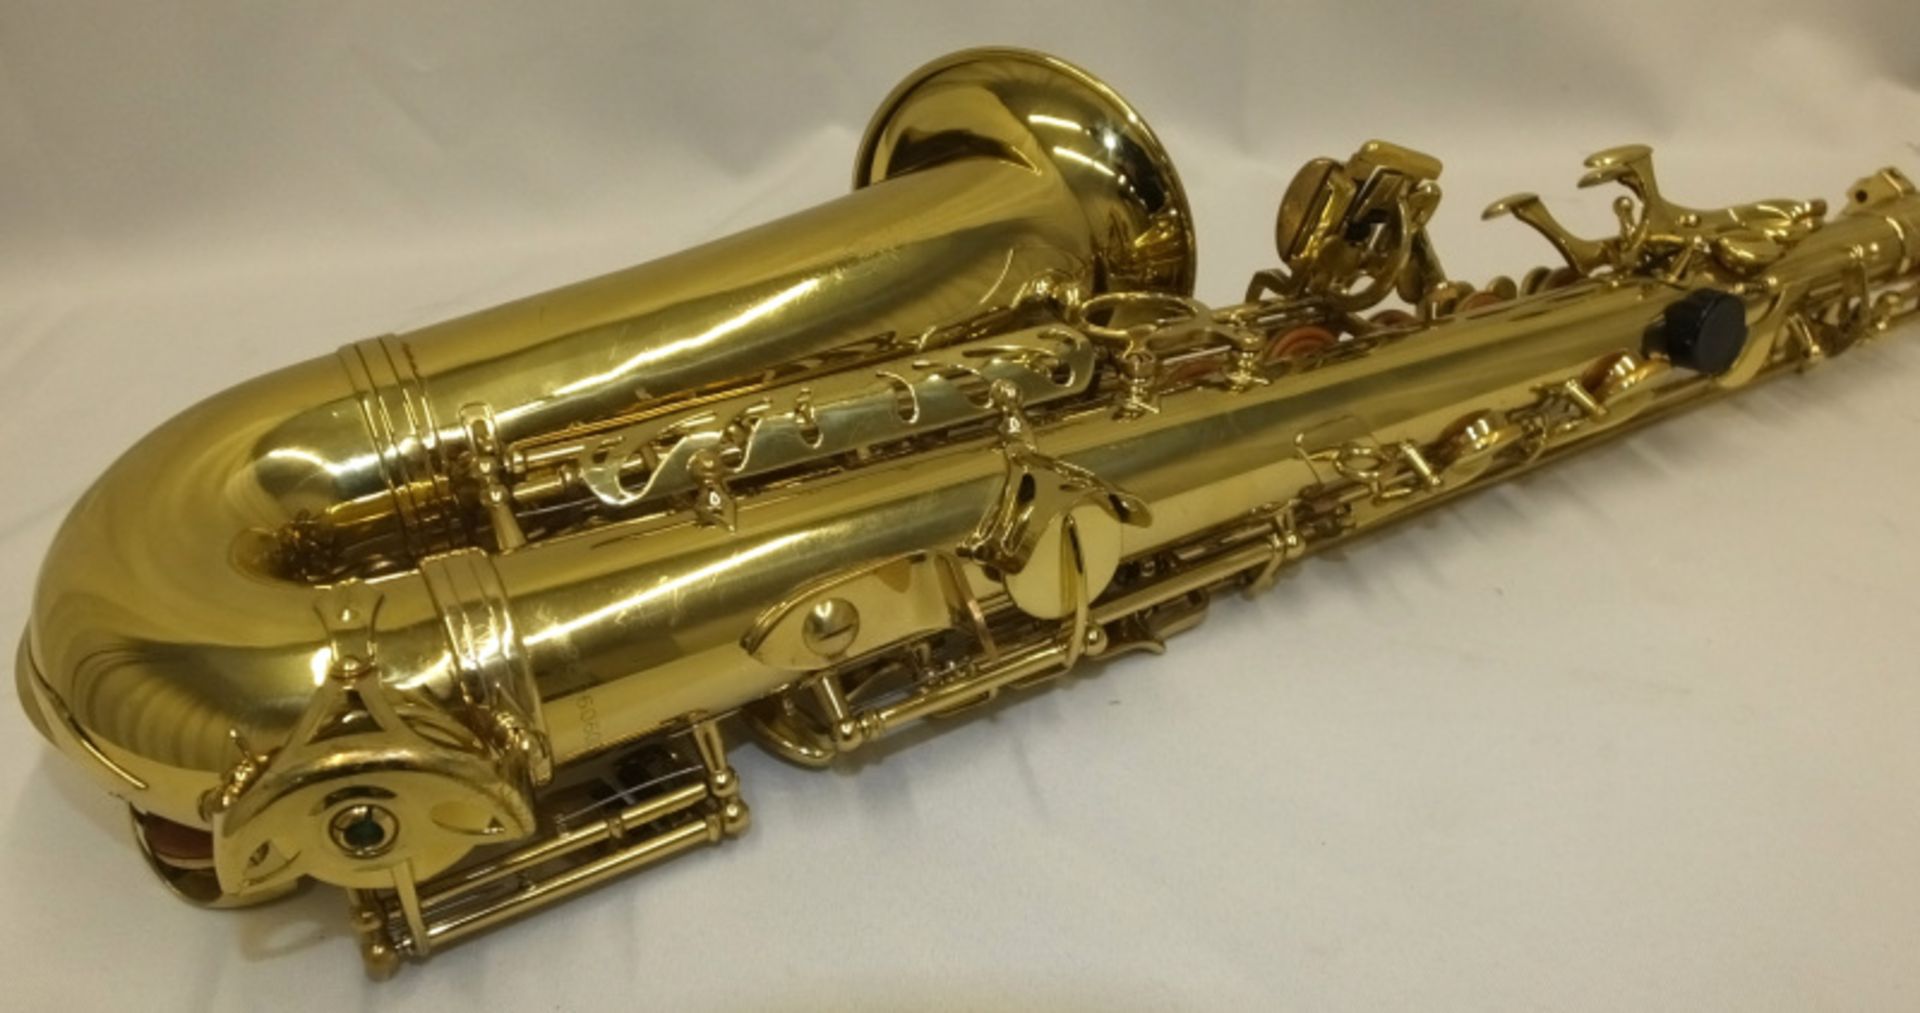 Simba Instruments Saxophone in Simba case - serial number 20960603 - Please check photos carefully - Image 13 of 16